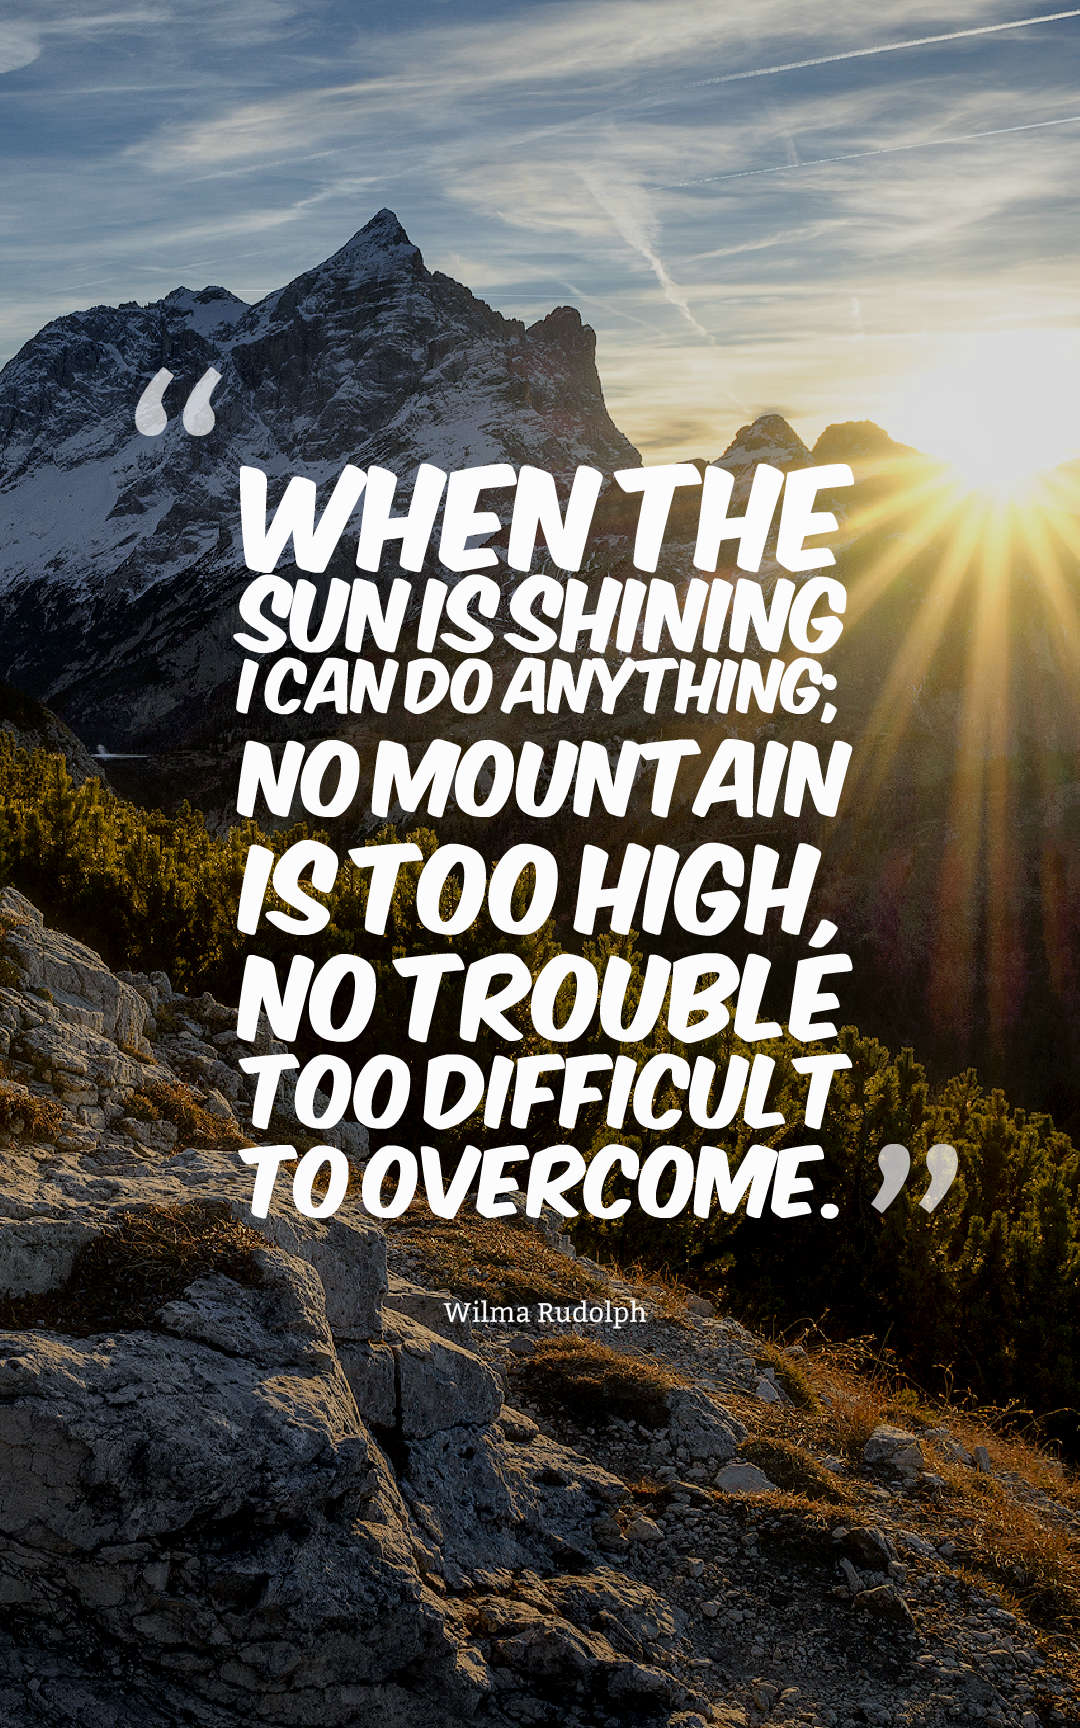 When the sun is shining I can do anything; no mountain is too high, no trouble too difficult to overcome.